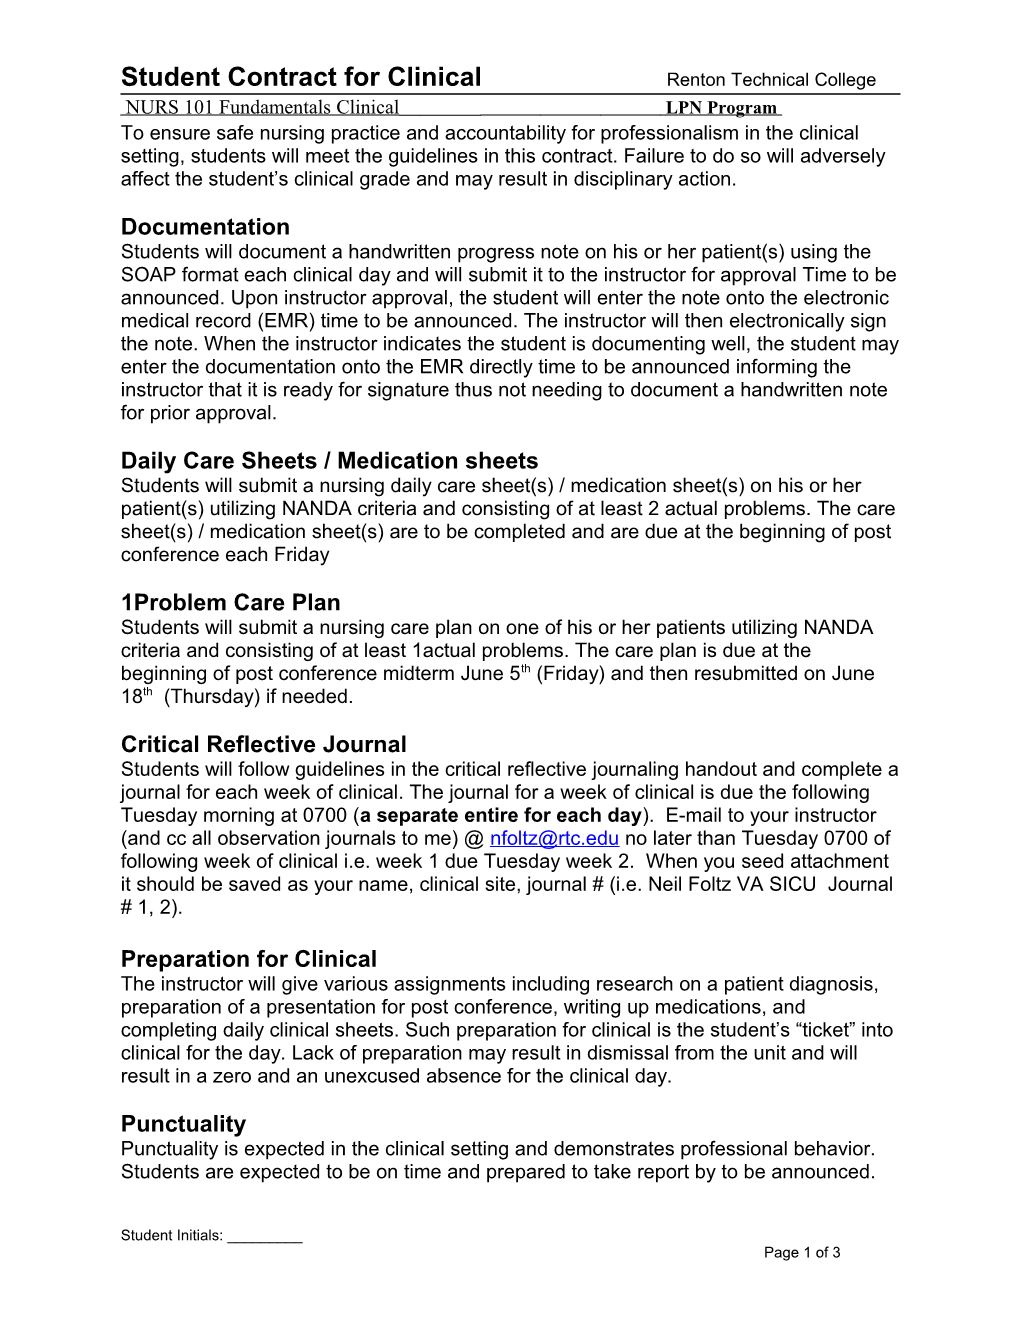 Student Contract for VA Clinical